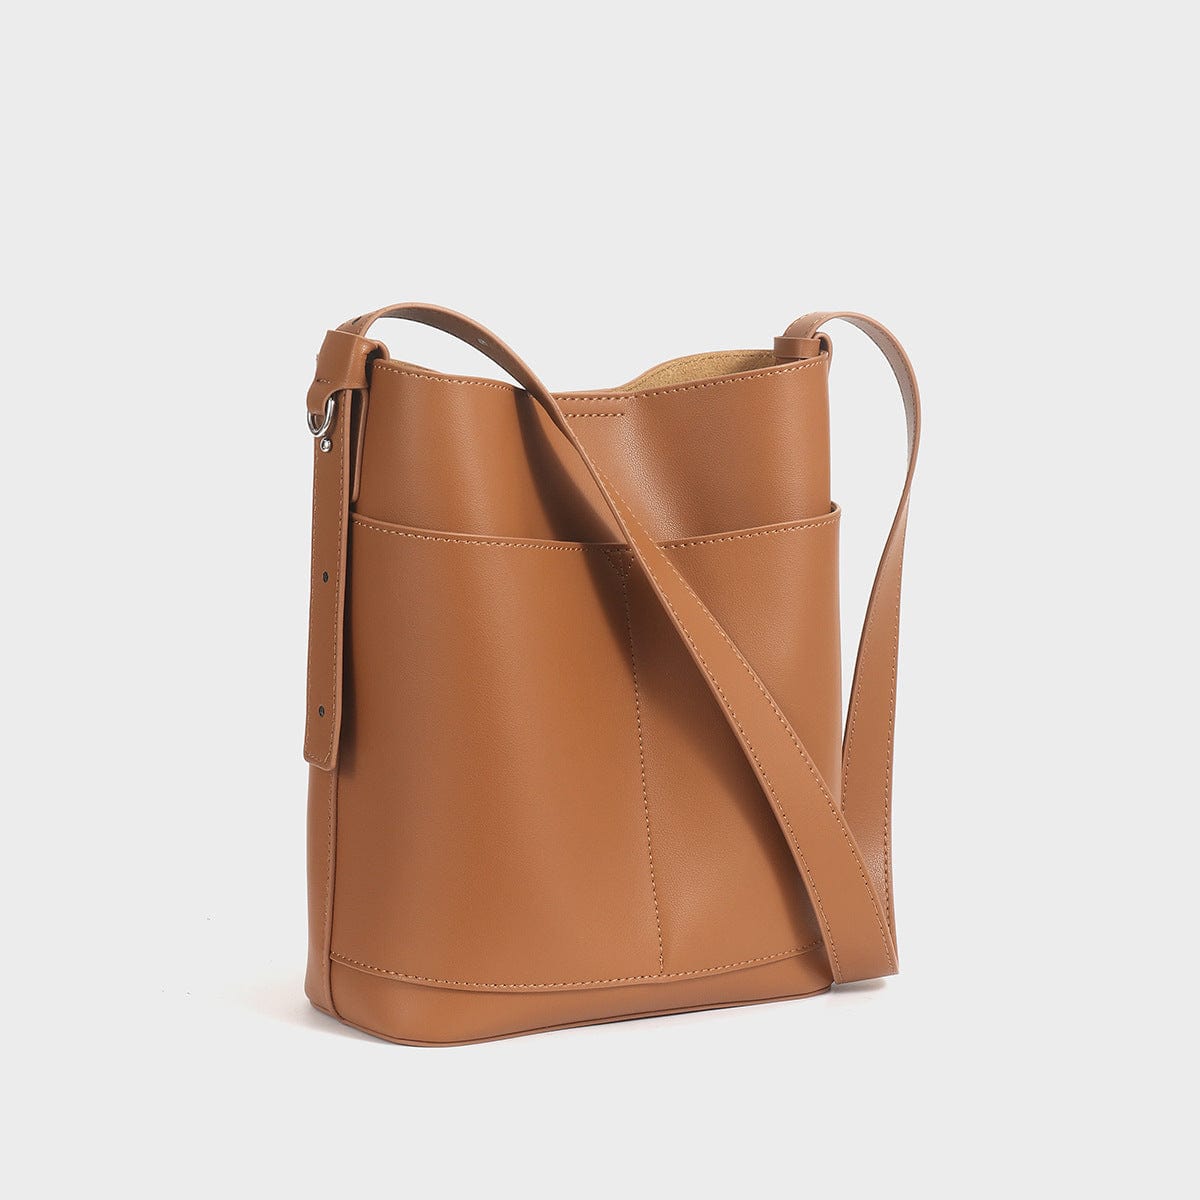 a tan leather bucket bag with a long strap